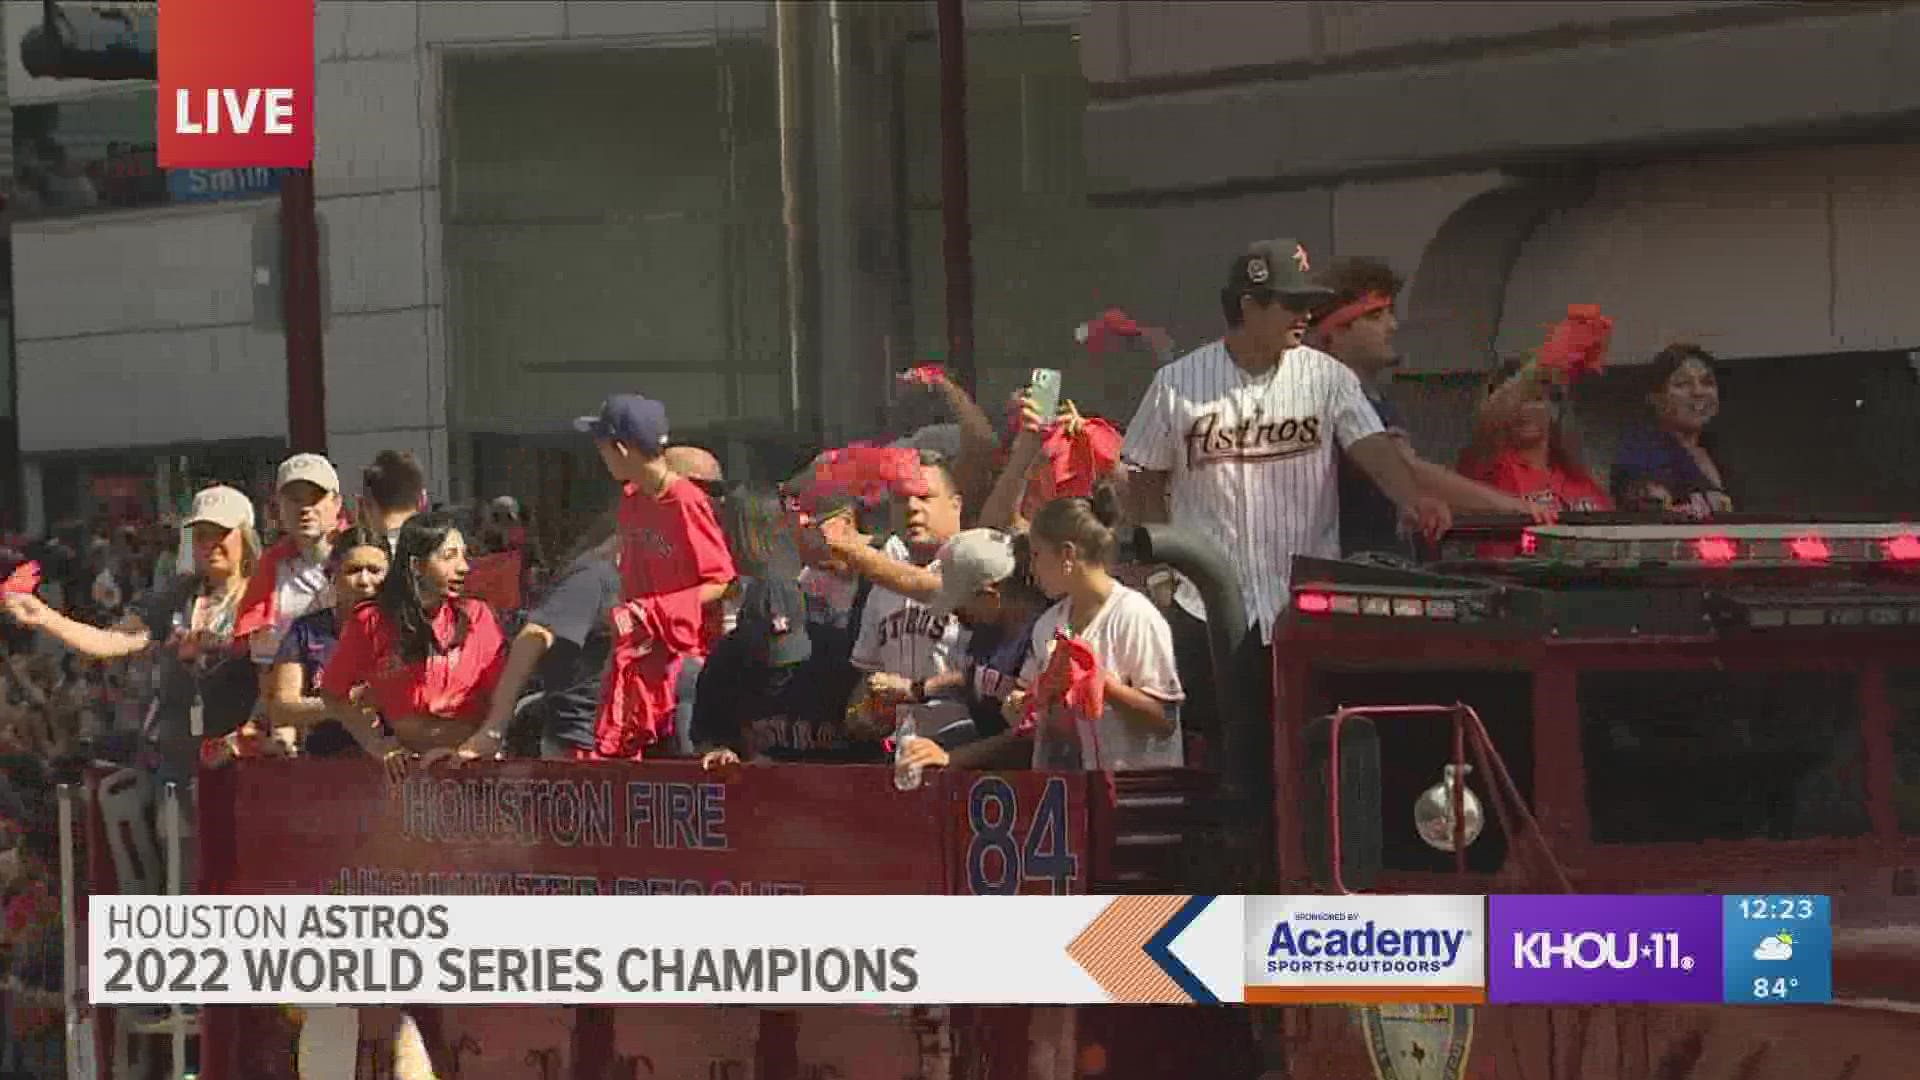 Astros fans celebrated the 2022 World Champions with a victory parade in downtown Houston Monday.